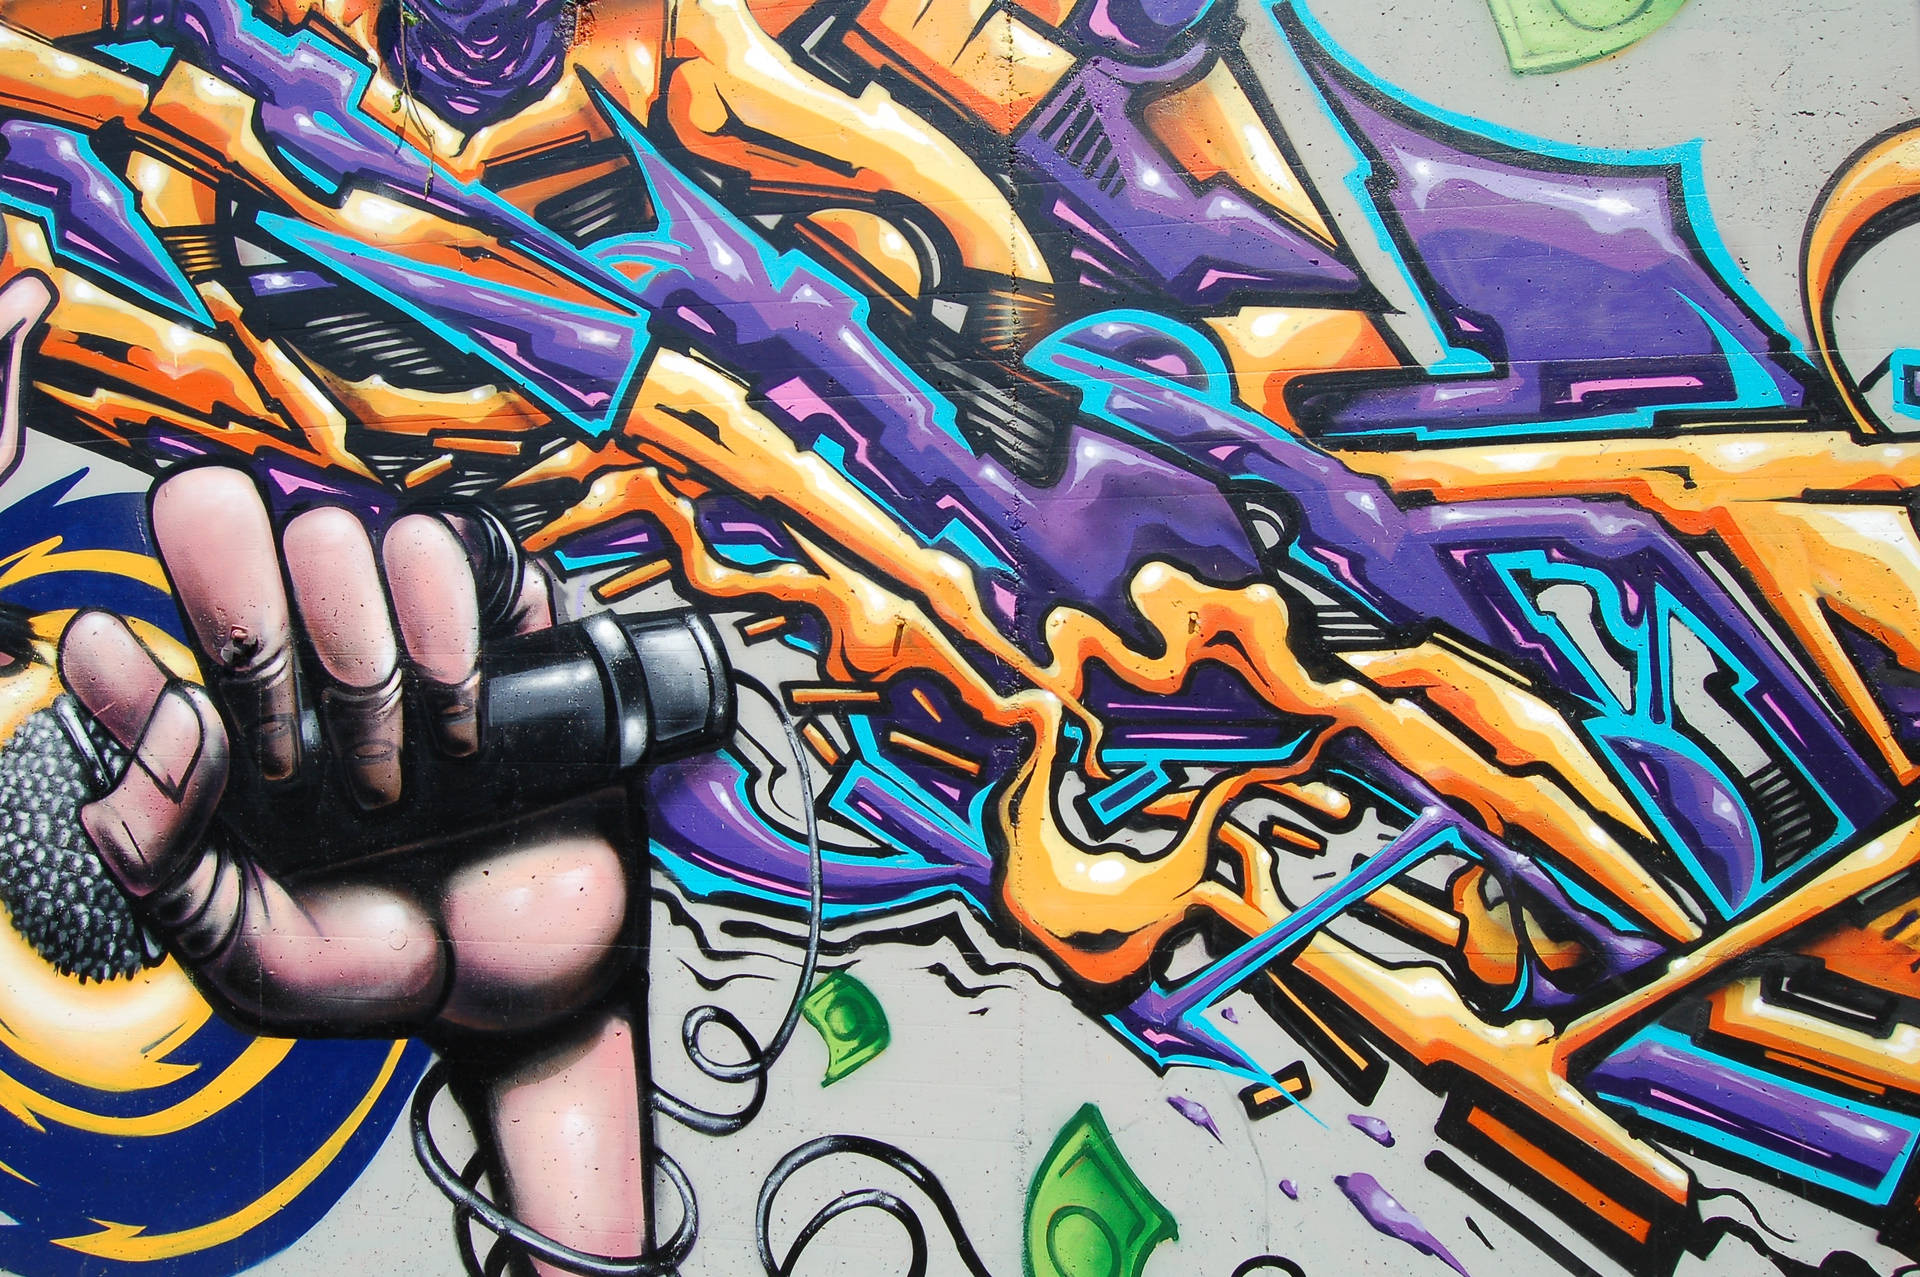 Adding the finishing touches to a vibrant music-inspired graffiti mural. Wallpaper